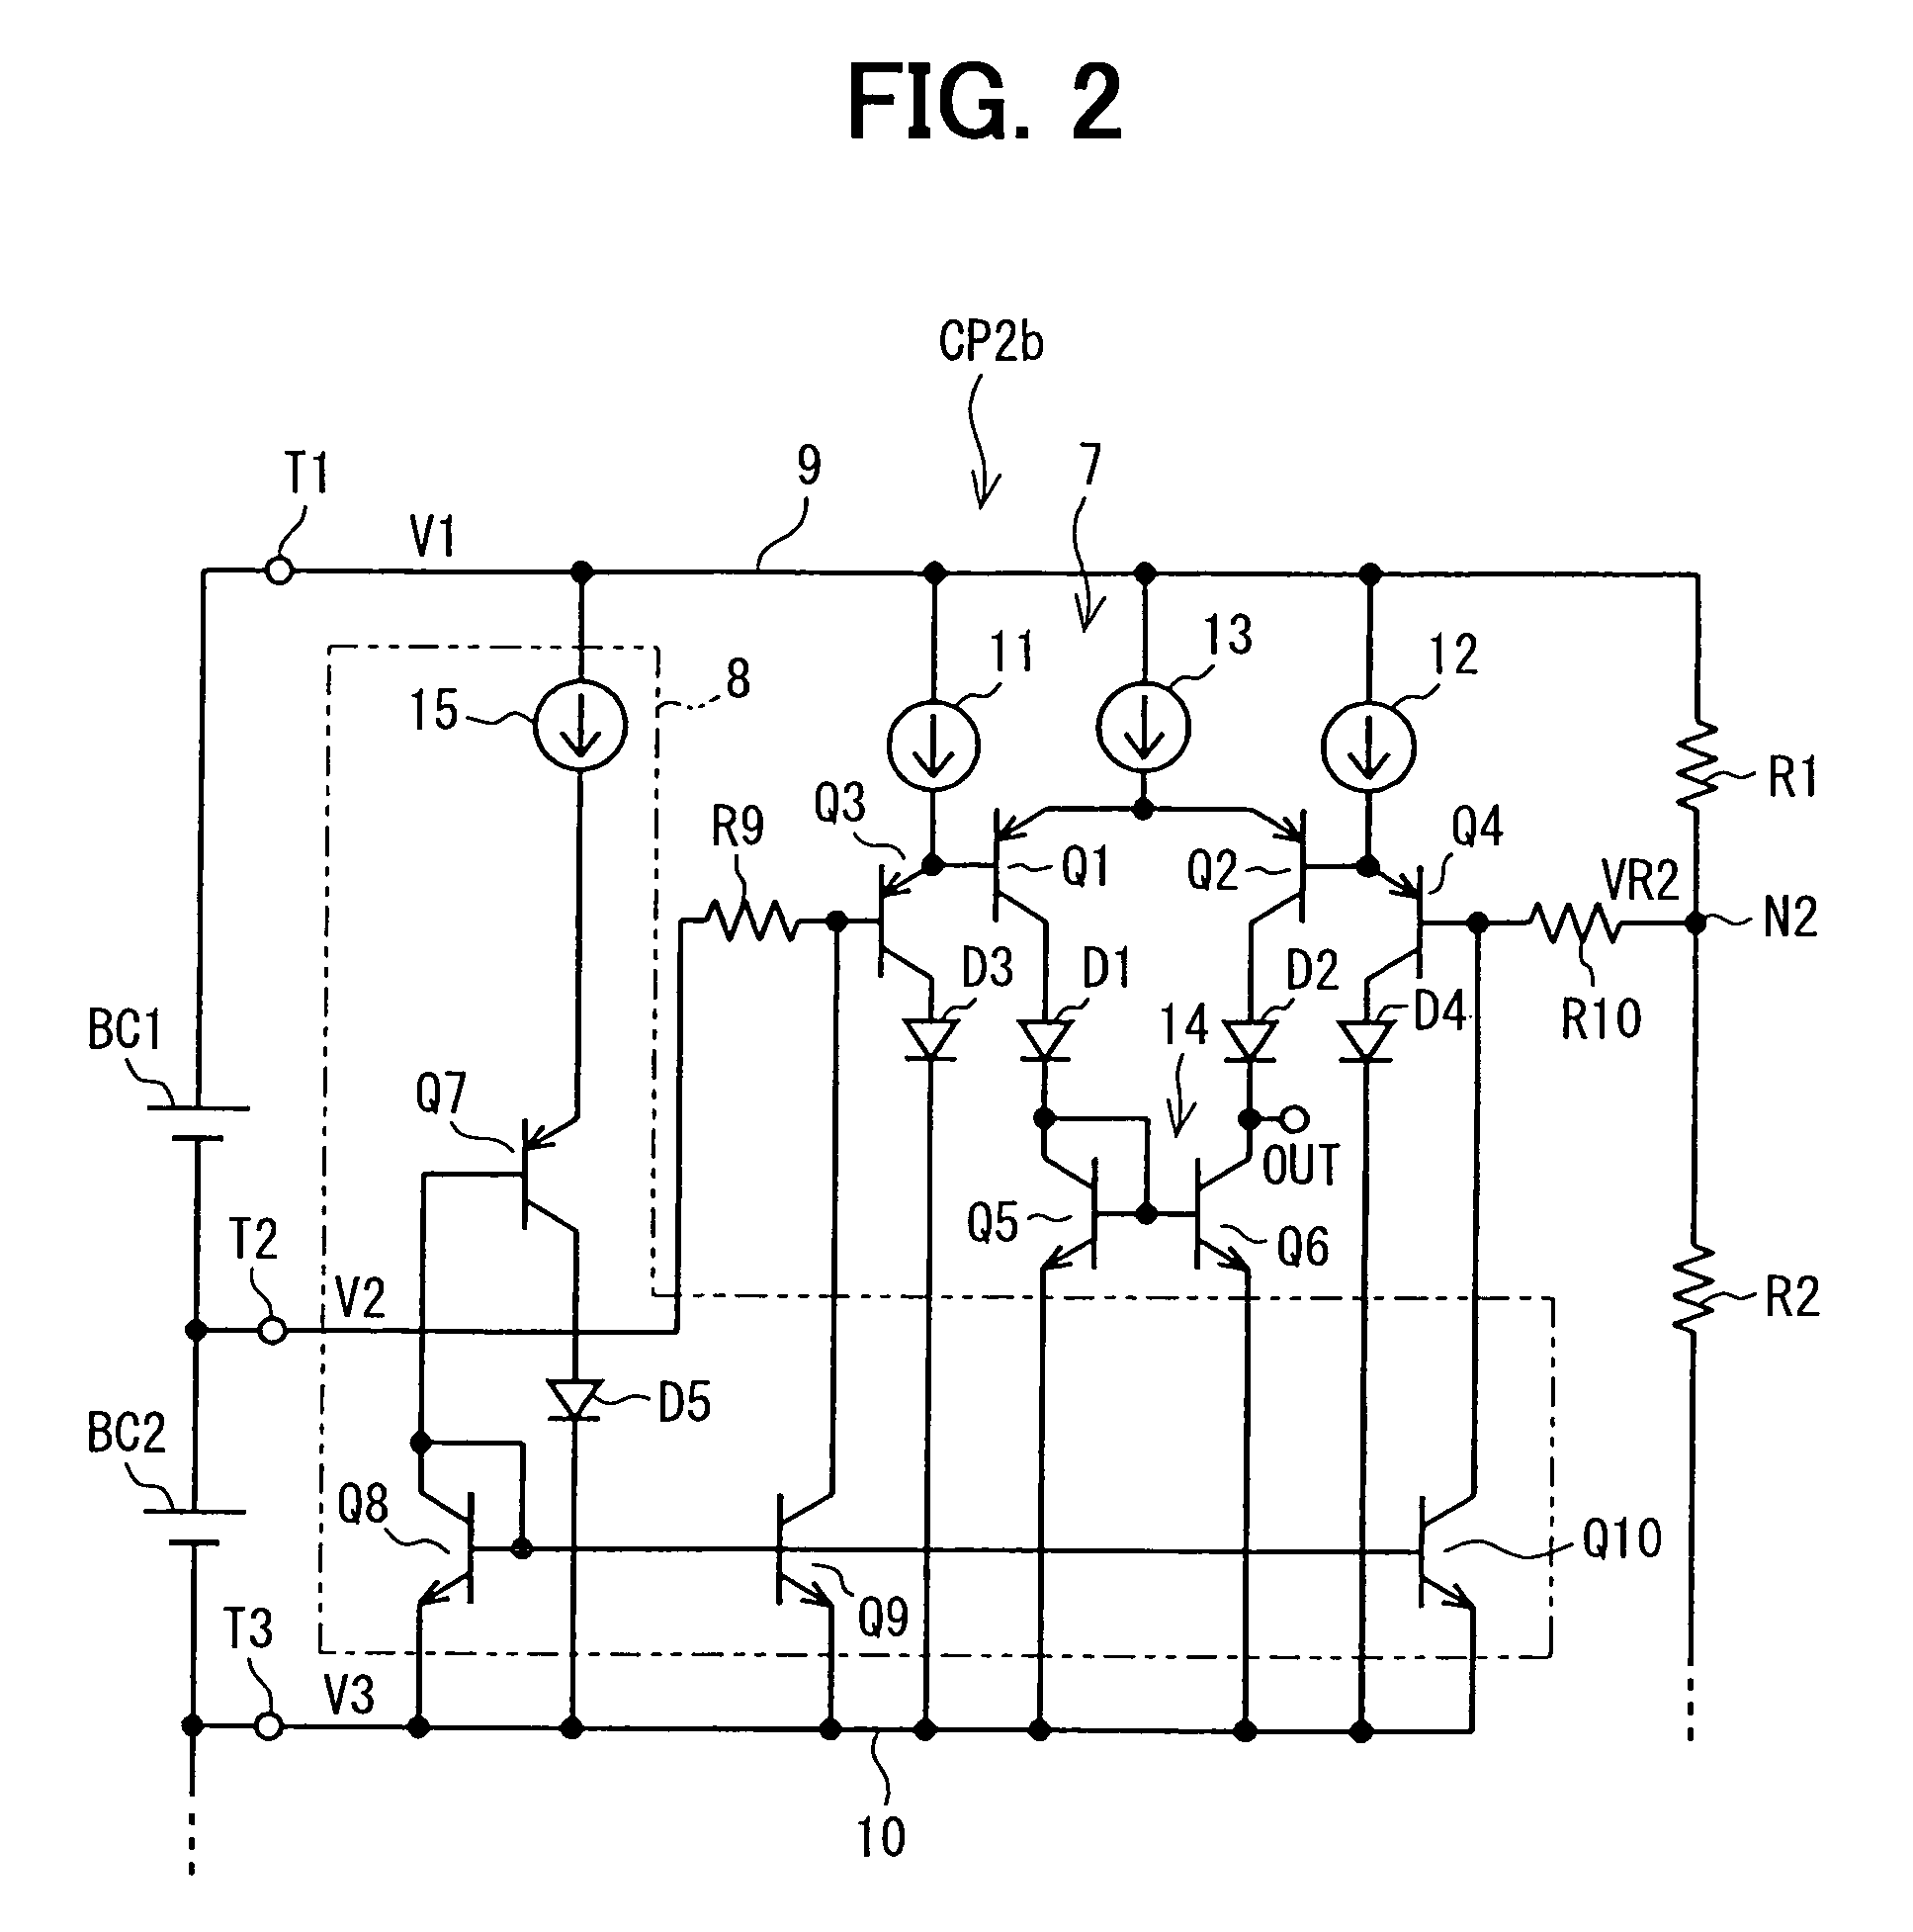 Cell voltage equalization apparatus for combined battery pack including circuit driven by power supplied by the combined battery pack